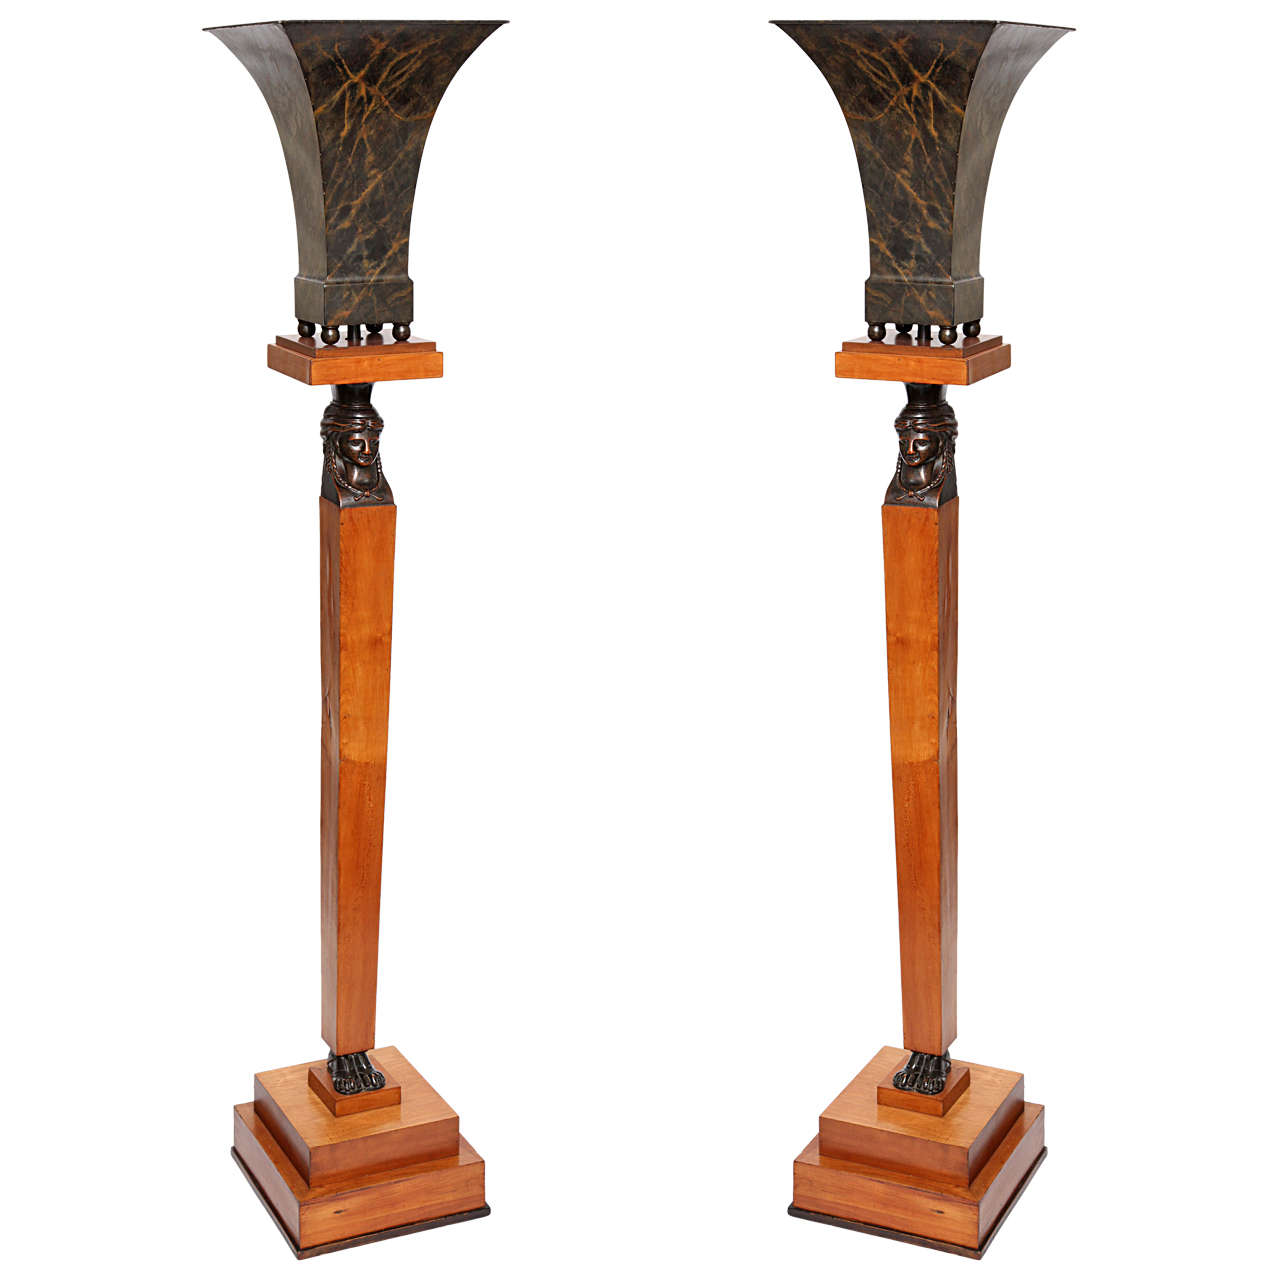 Pair of 1920s Classical Modern Torcheres